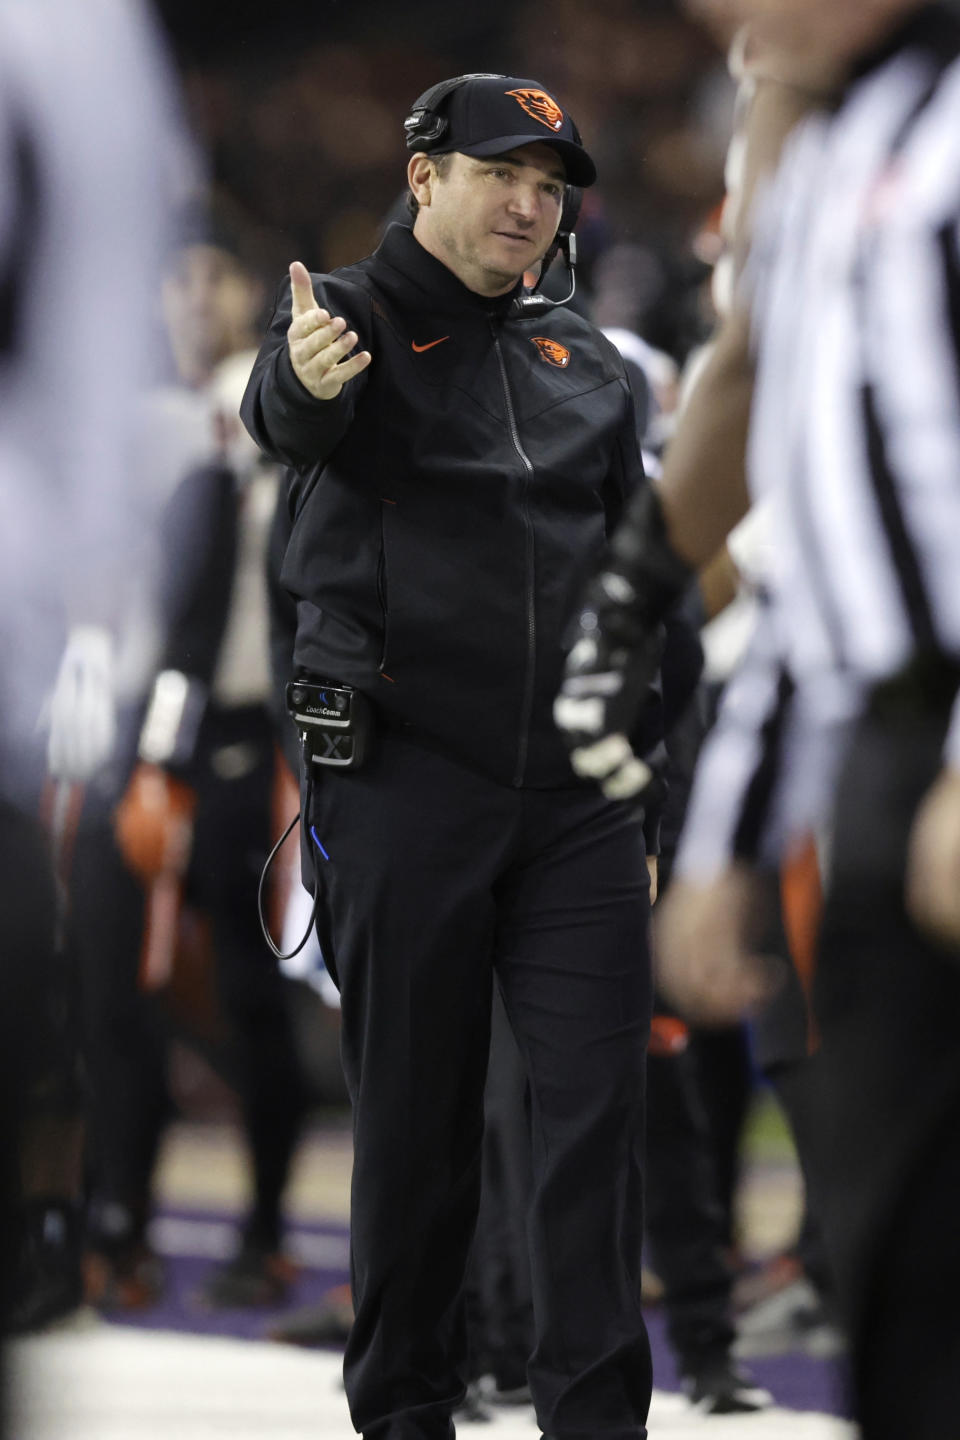 Oregon State Oregon State head coach Jonathan Smith gestures from the bench against Washington during the second half of an NCAA college football game, Friday, Nov. 4, 2022, in Seattle. Washington won 24-21. (AP Photo/John Froschauer)